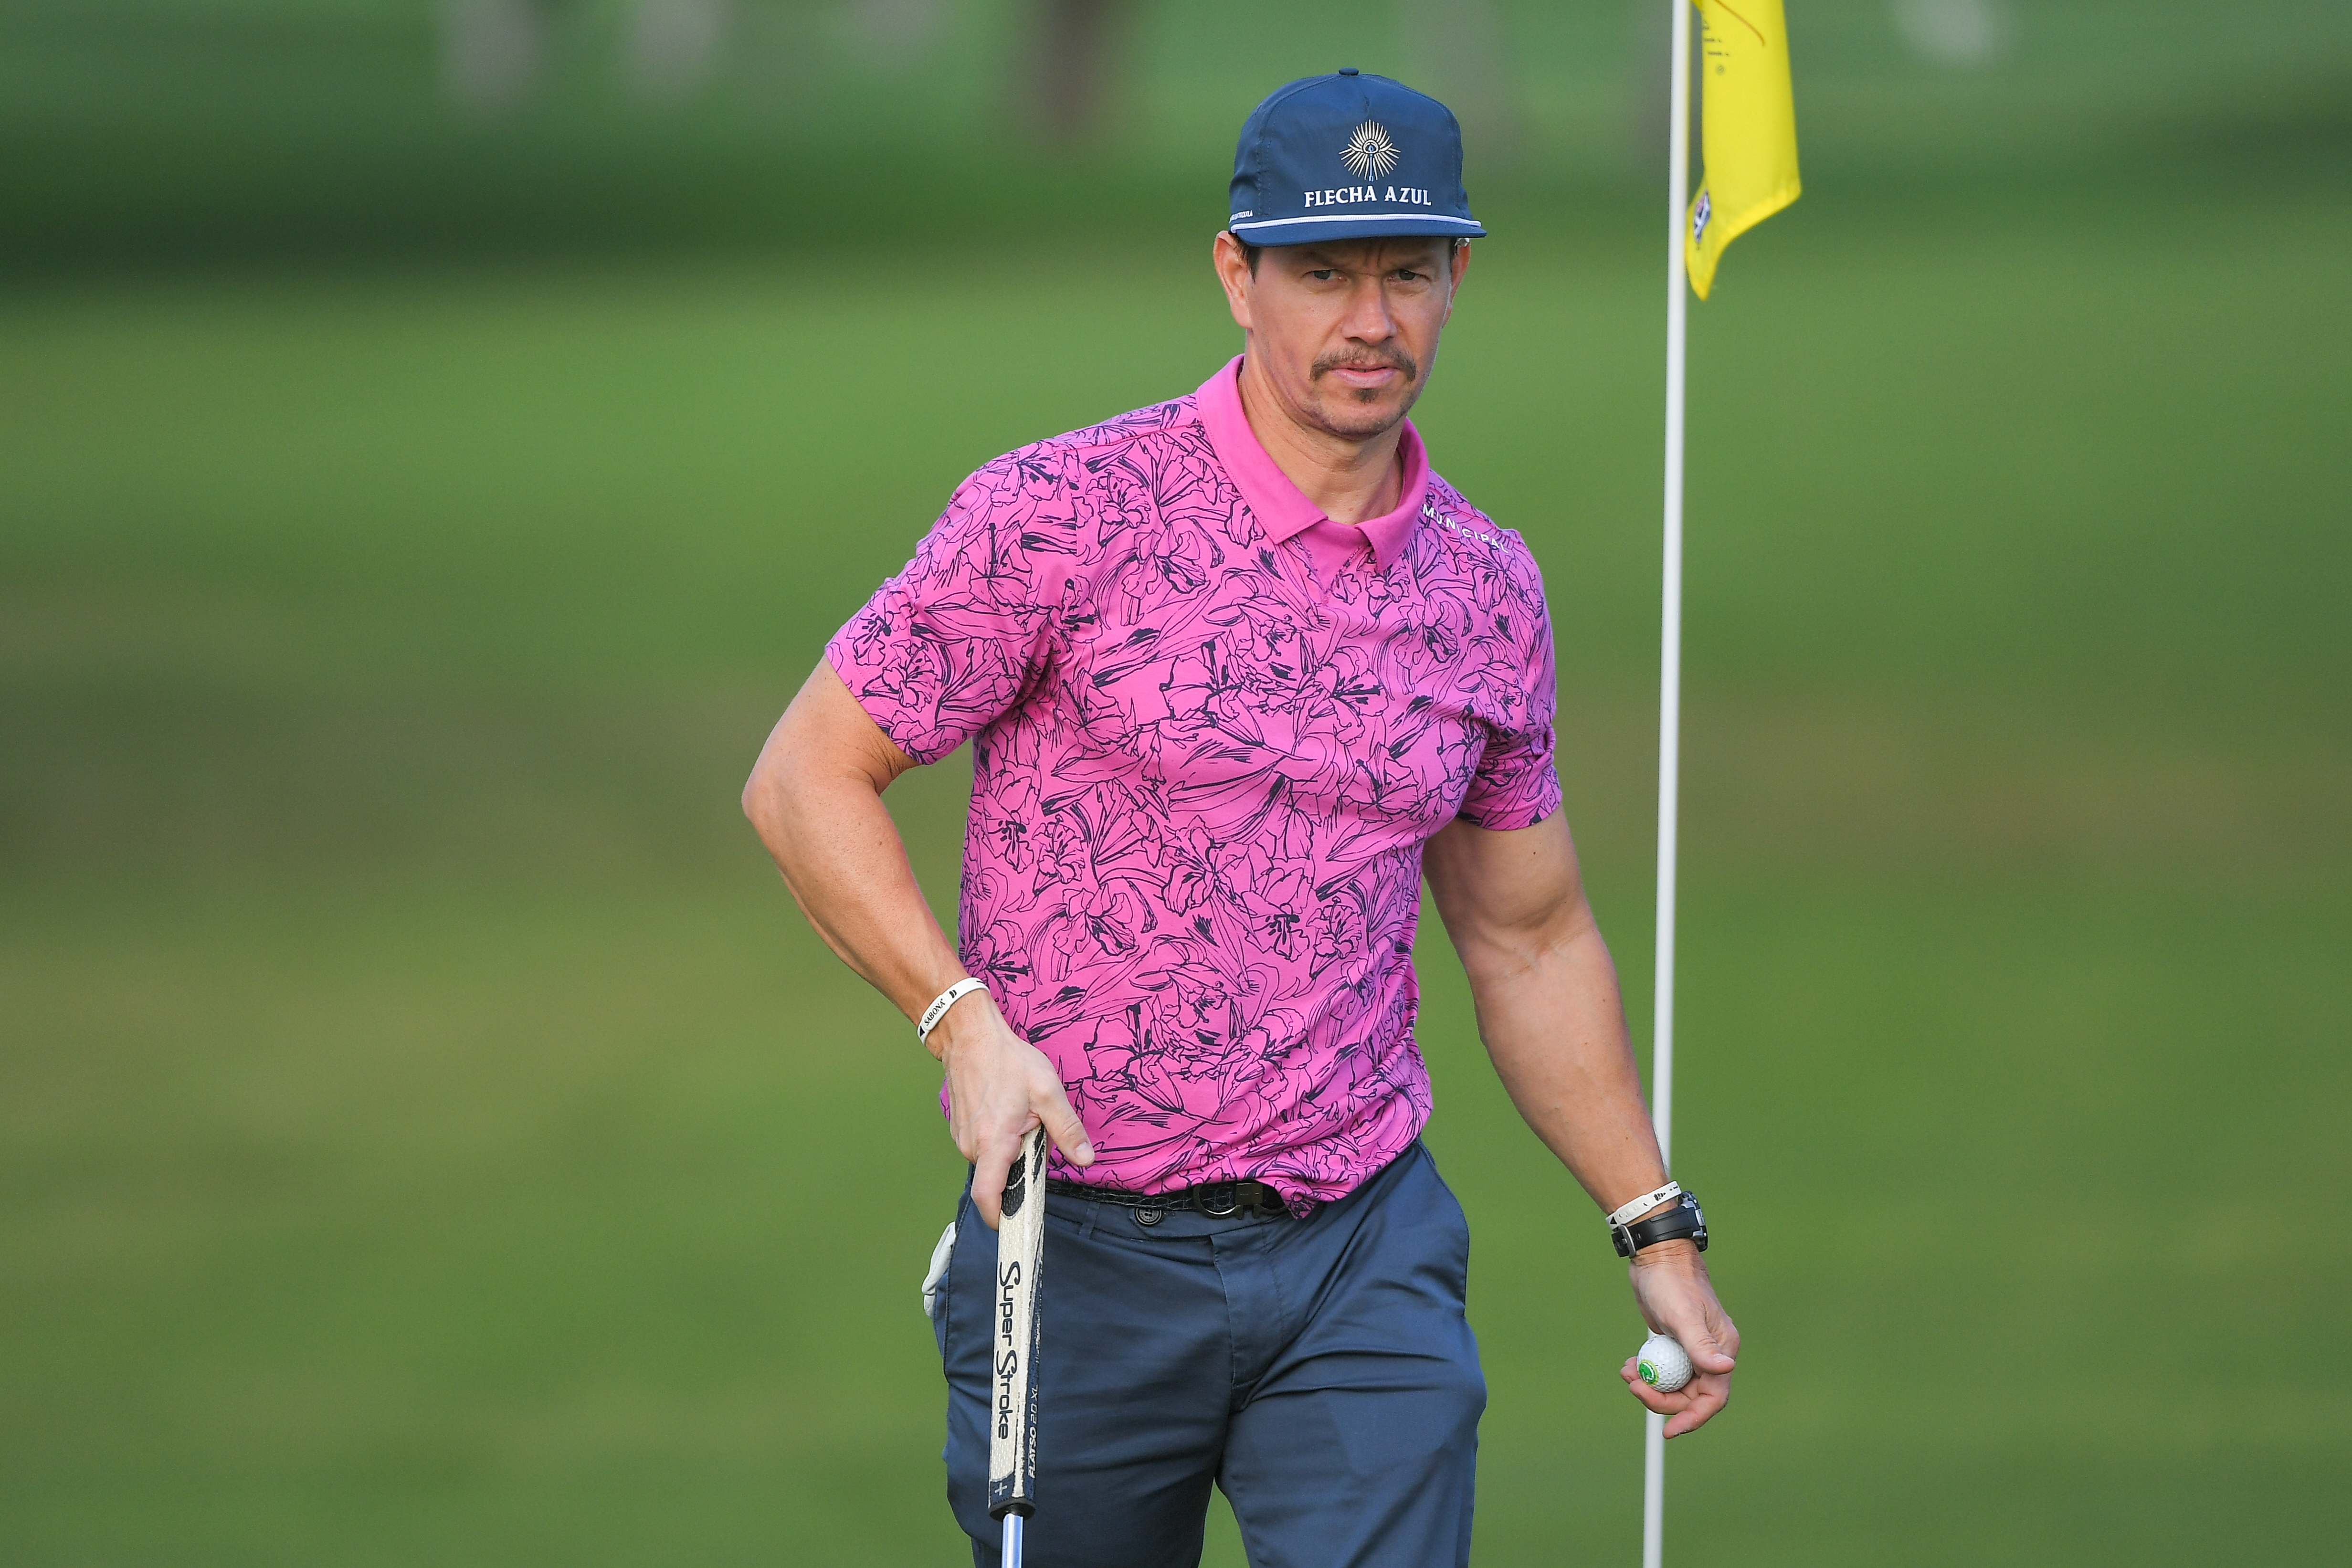 grens Verlichting Geometrie Let's talk about the polo T-shirt Mark Wahlberg wore at the Sony Open  Pro-Am | Golf Equipment: Clubs, Balls, Bags | Golf Digest